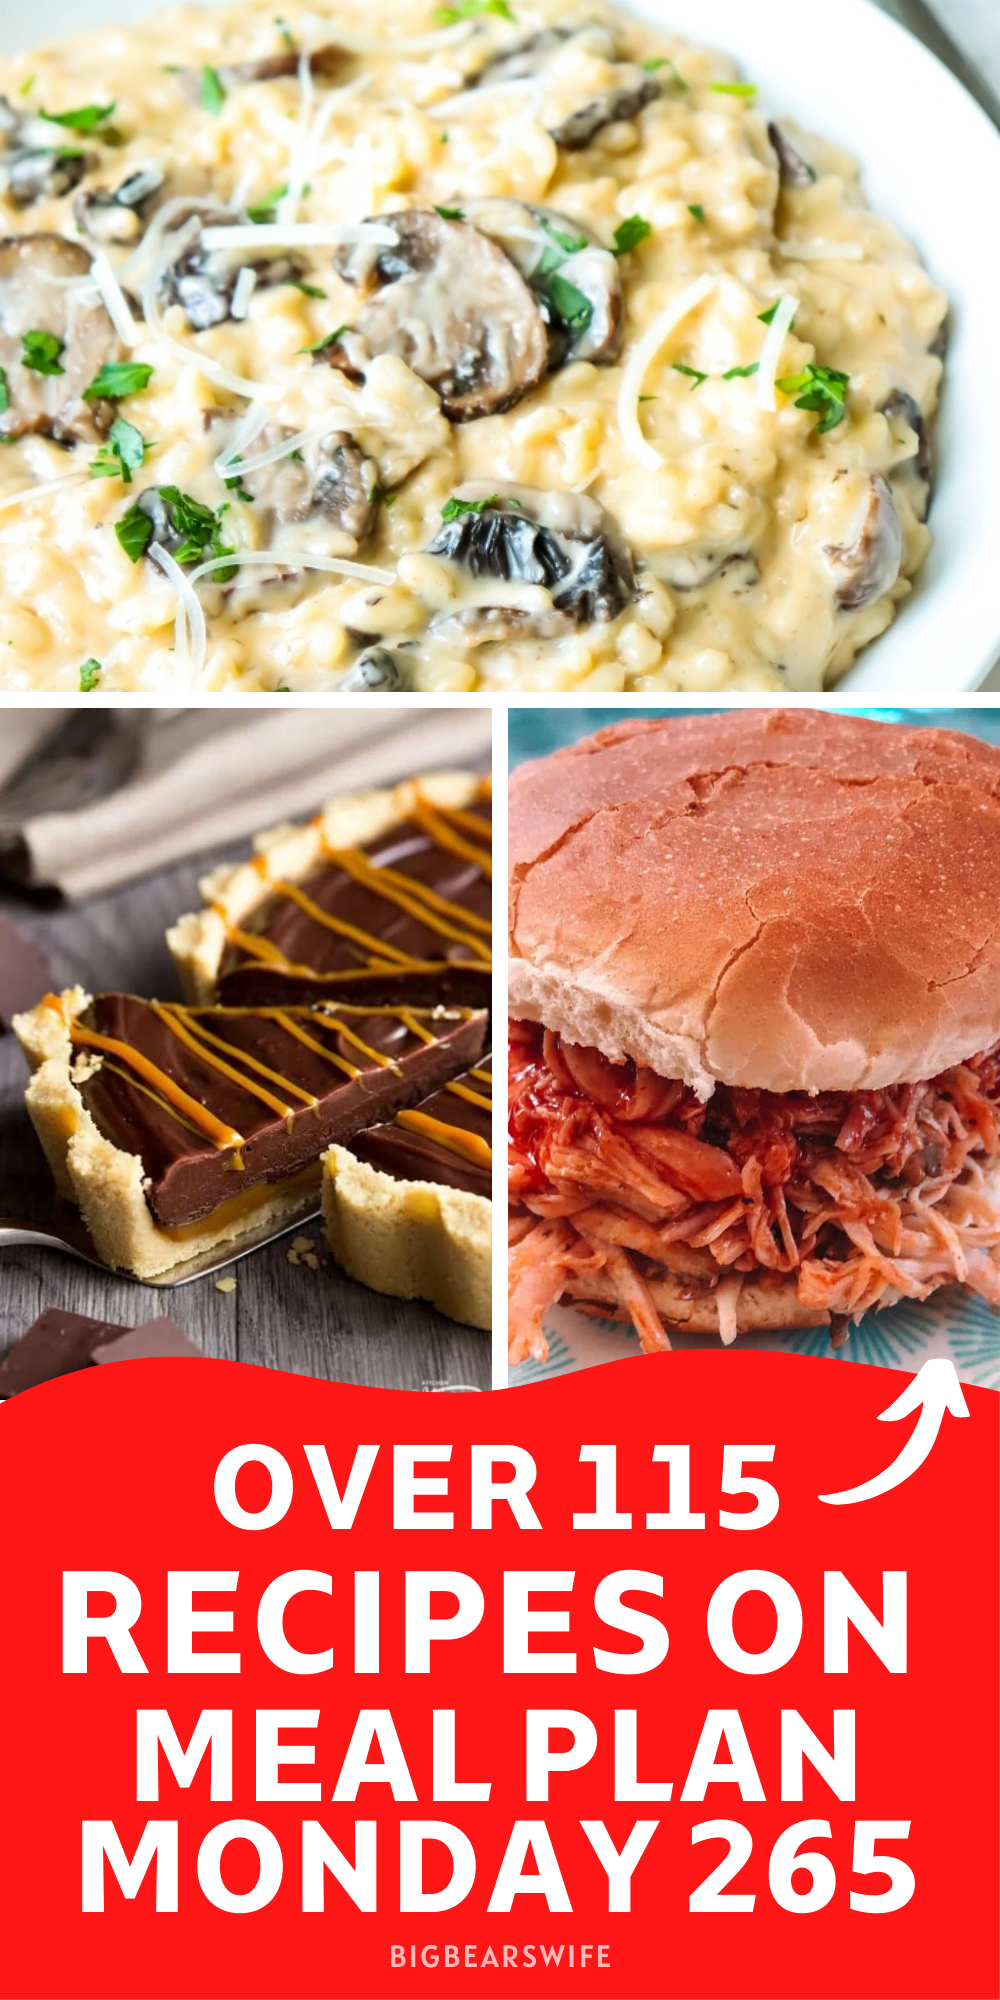 Welcome to Meal Plan Monday 265! We're featuring recipes like, Mexican Stuffed Shells, Slow Cooker Buffalo Chicken, Insanely Easy No Bake Caramel Chocolate Tart and Mushroom Risotto! via @bigbearswife